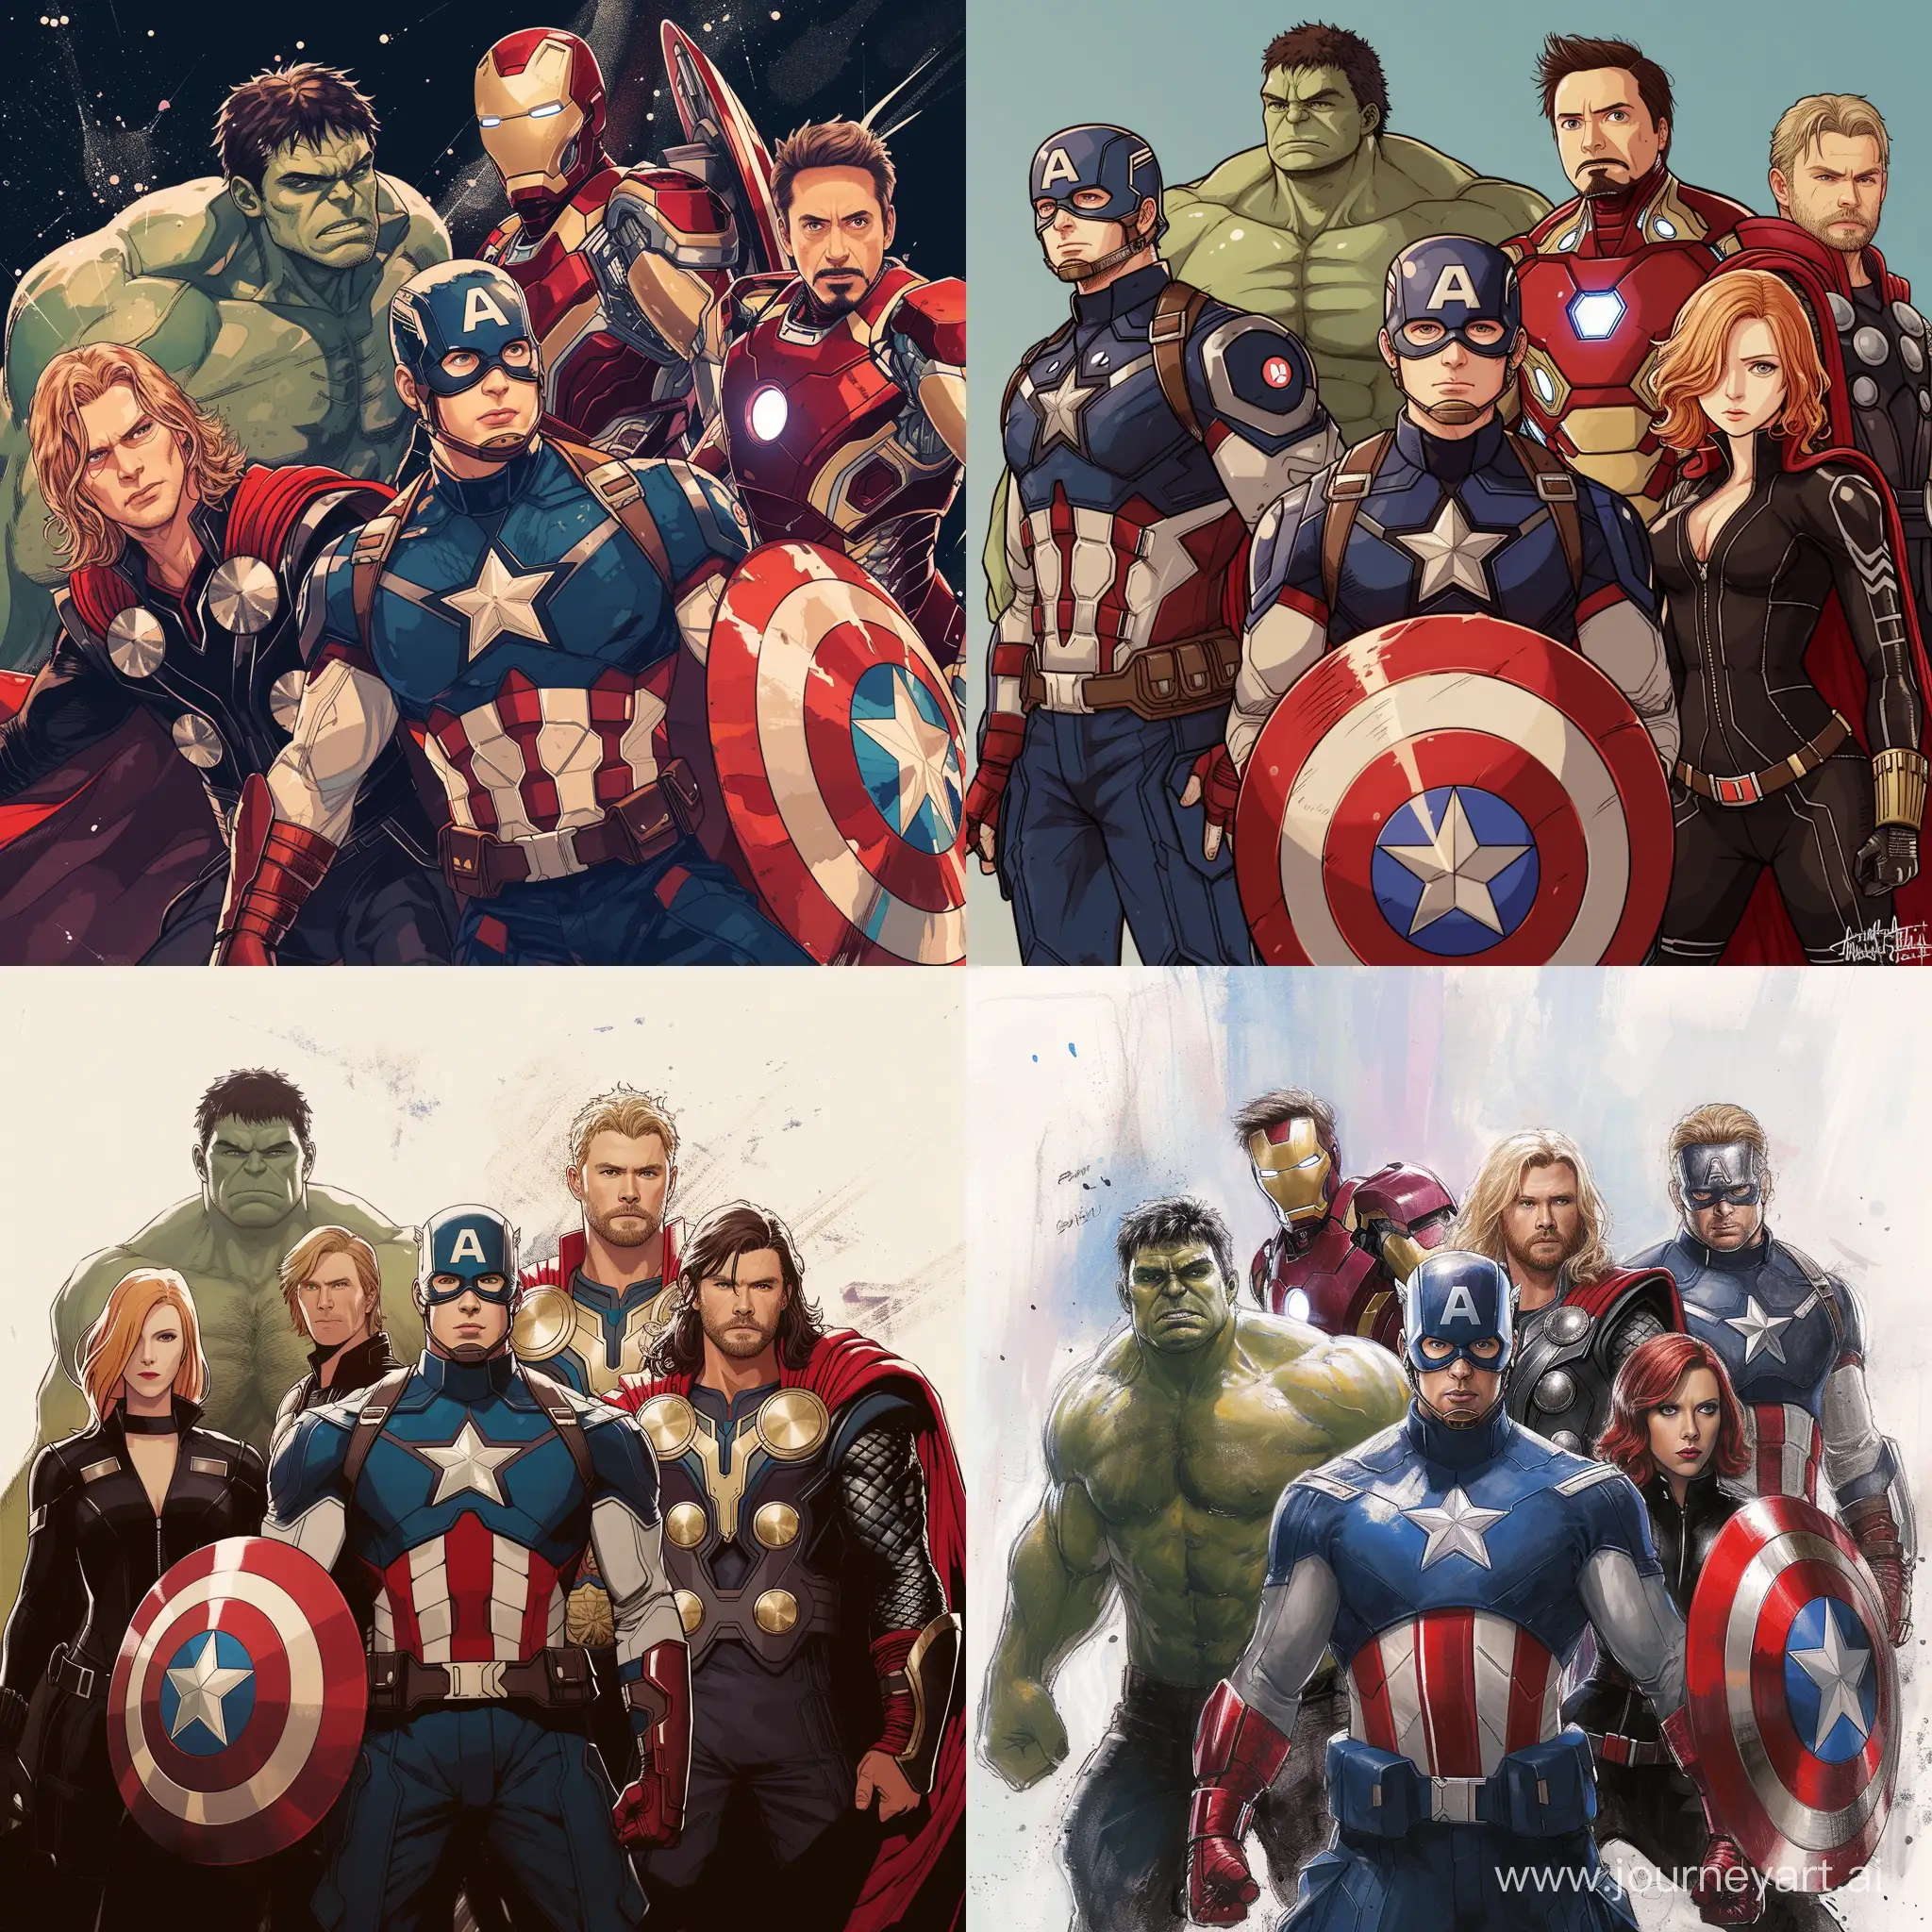 All 6 Avengers in their iconic 2012 movie pose in studio Ghibli art style 